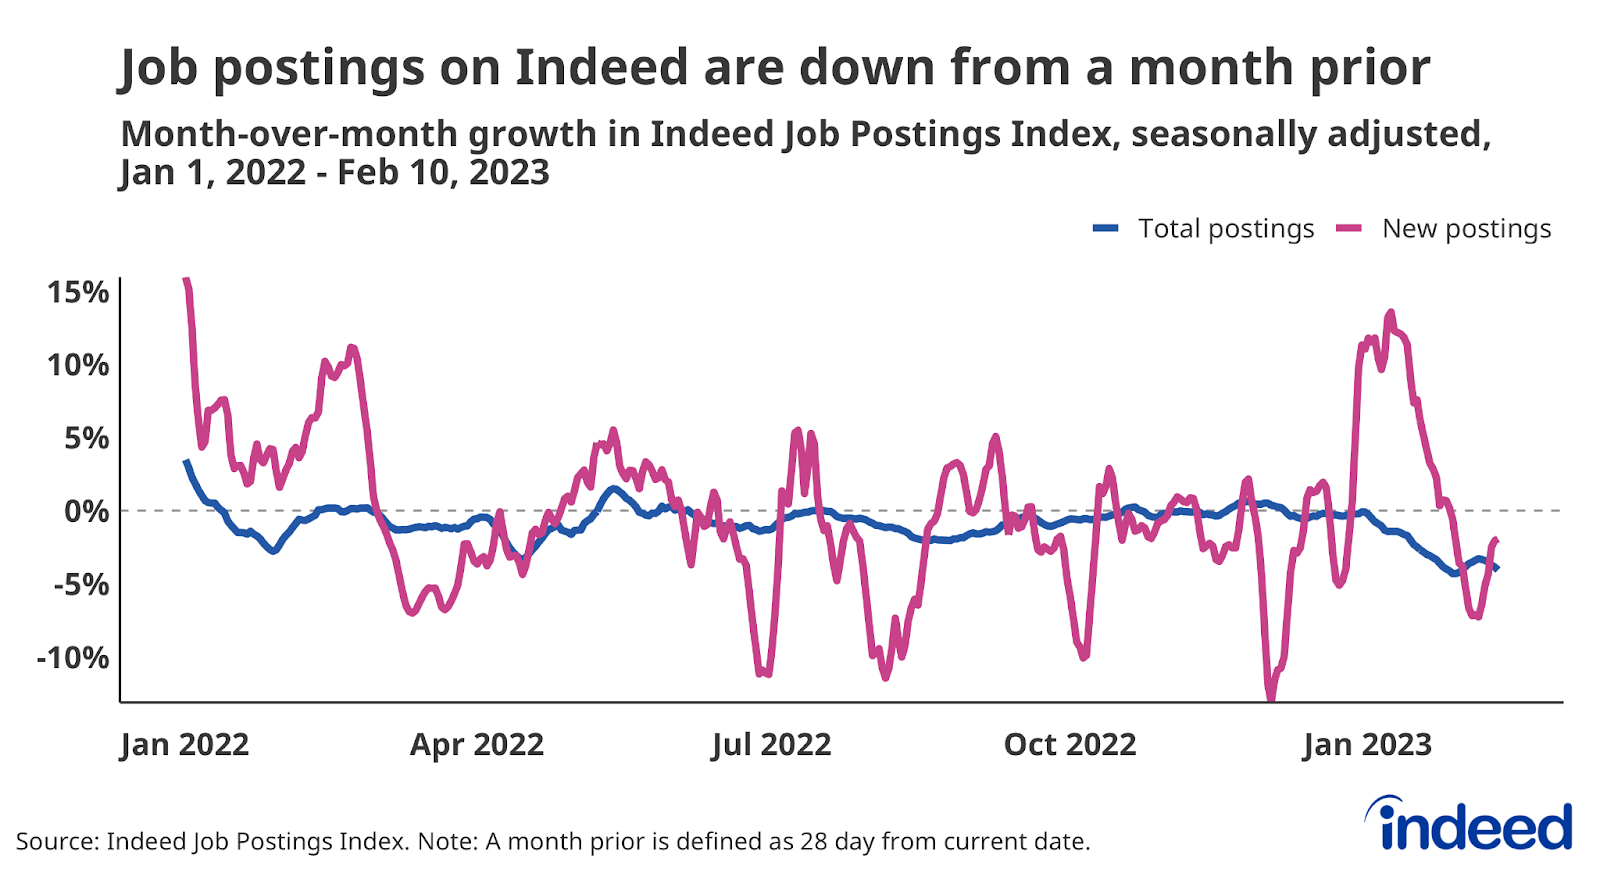 Line graph titled "Job postings on Indeed are down from a month prior” with a vertical axis going from -10% to 15%. The graph shows two lines for total postings and new postings. Both series are declining on a month-over-month basis as of Feb 10th.